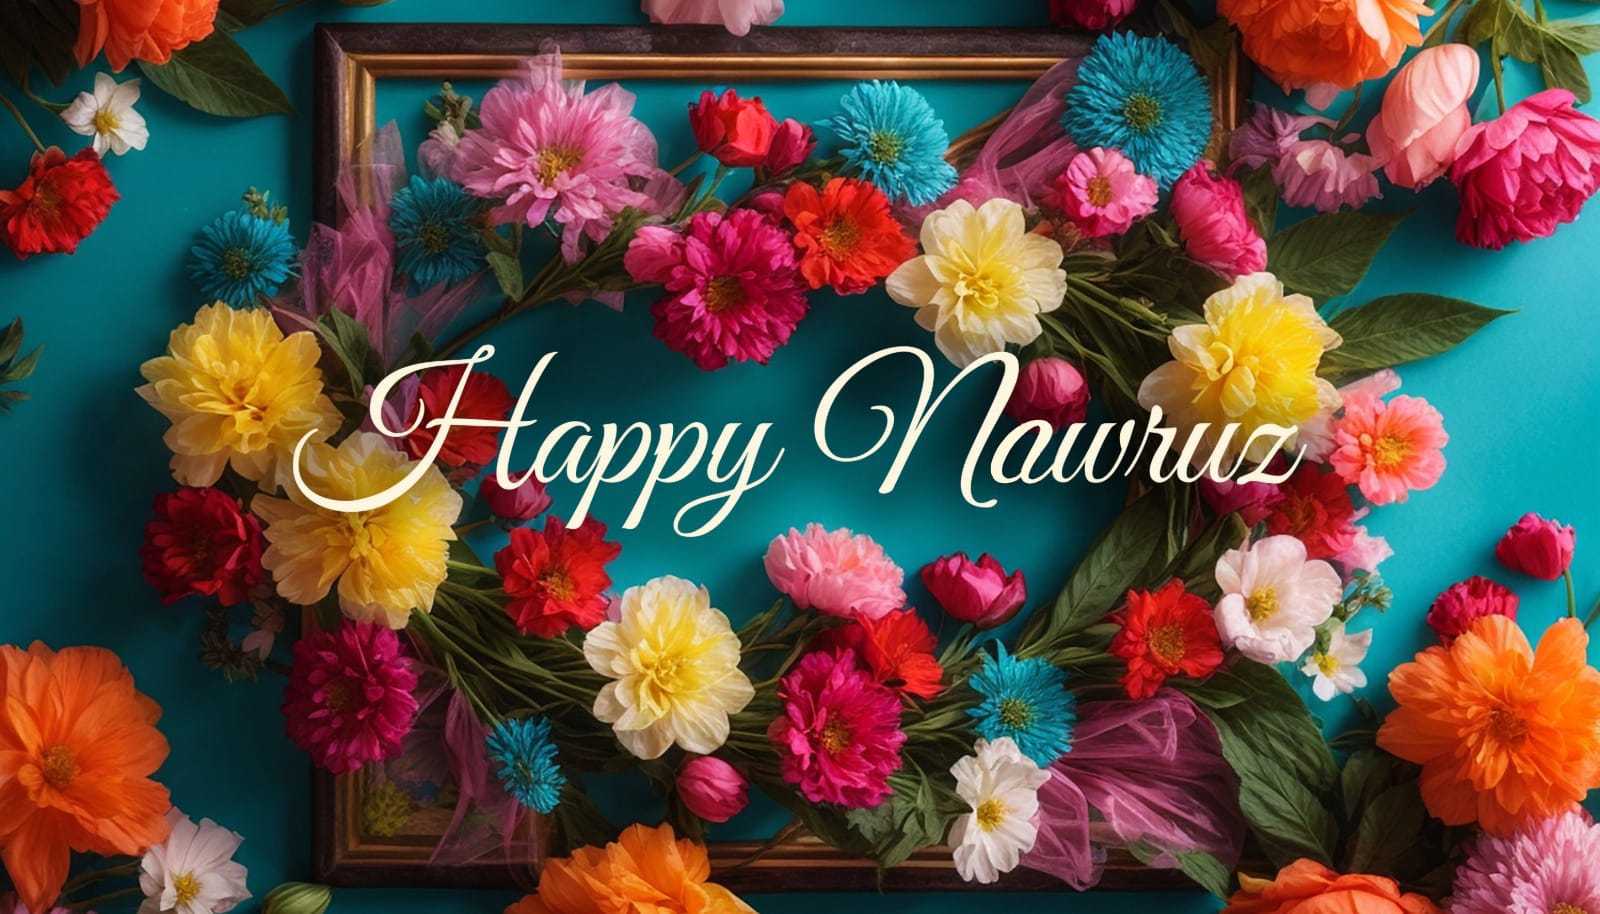 Celebrating Naw Ruz - A Story of Tradition, Memories, and Renewal